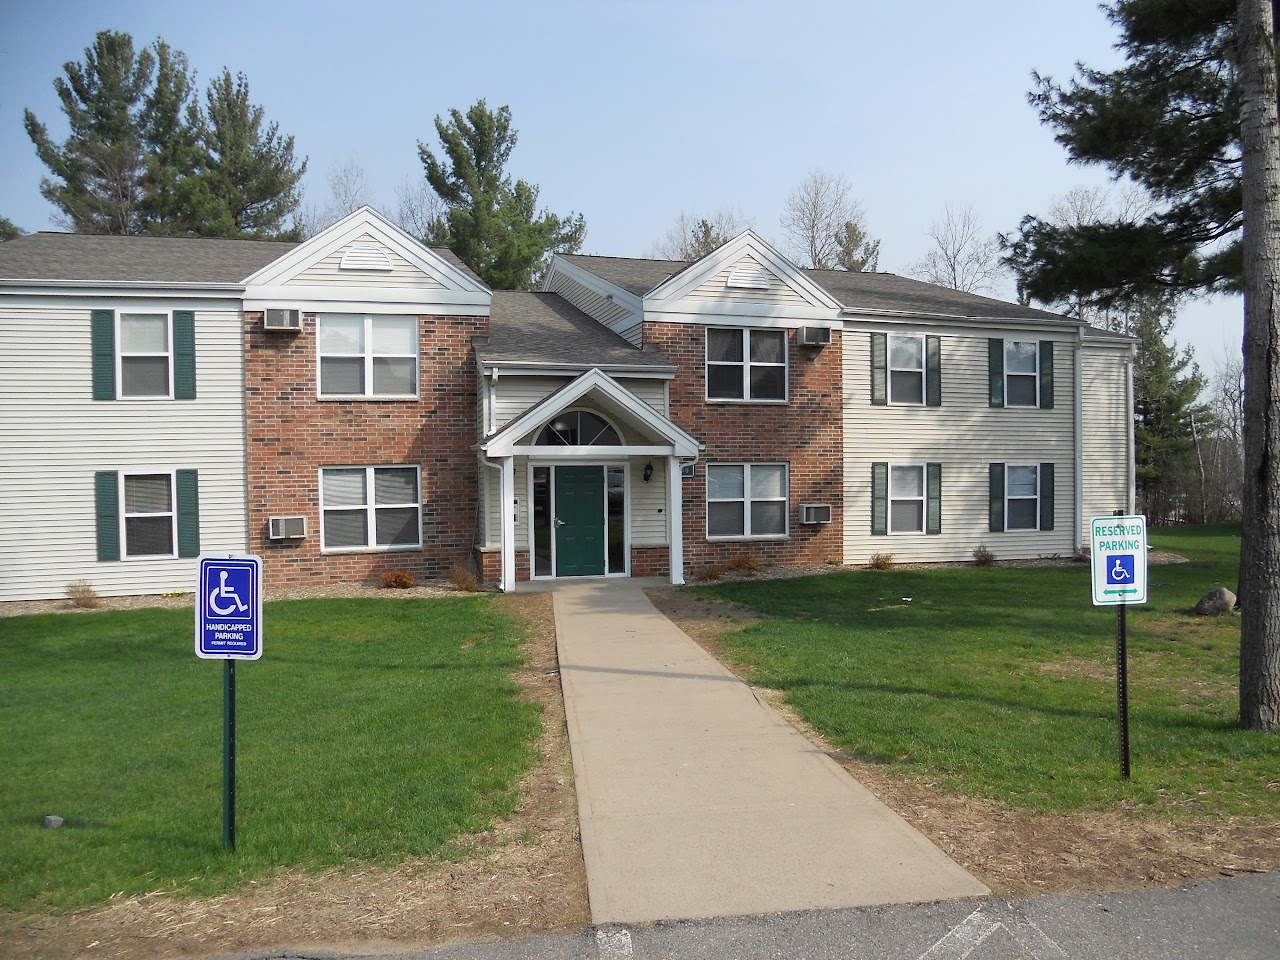 Photo of WESTON PINES APTS. Affordable housing located at 3750 WESTON PINES LN SCHOFIELD, WI 54476